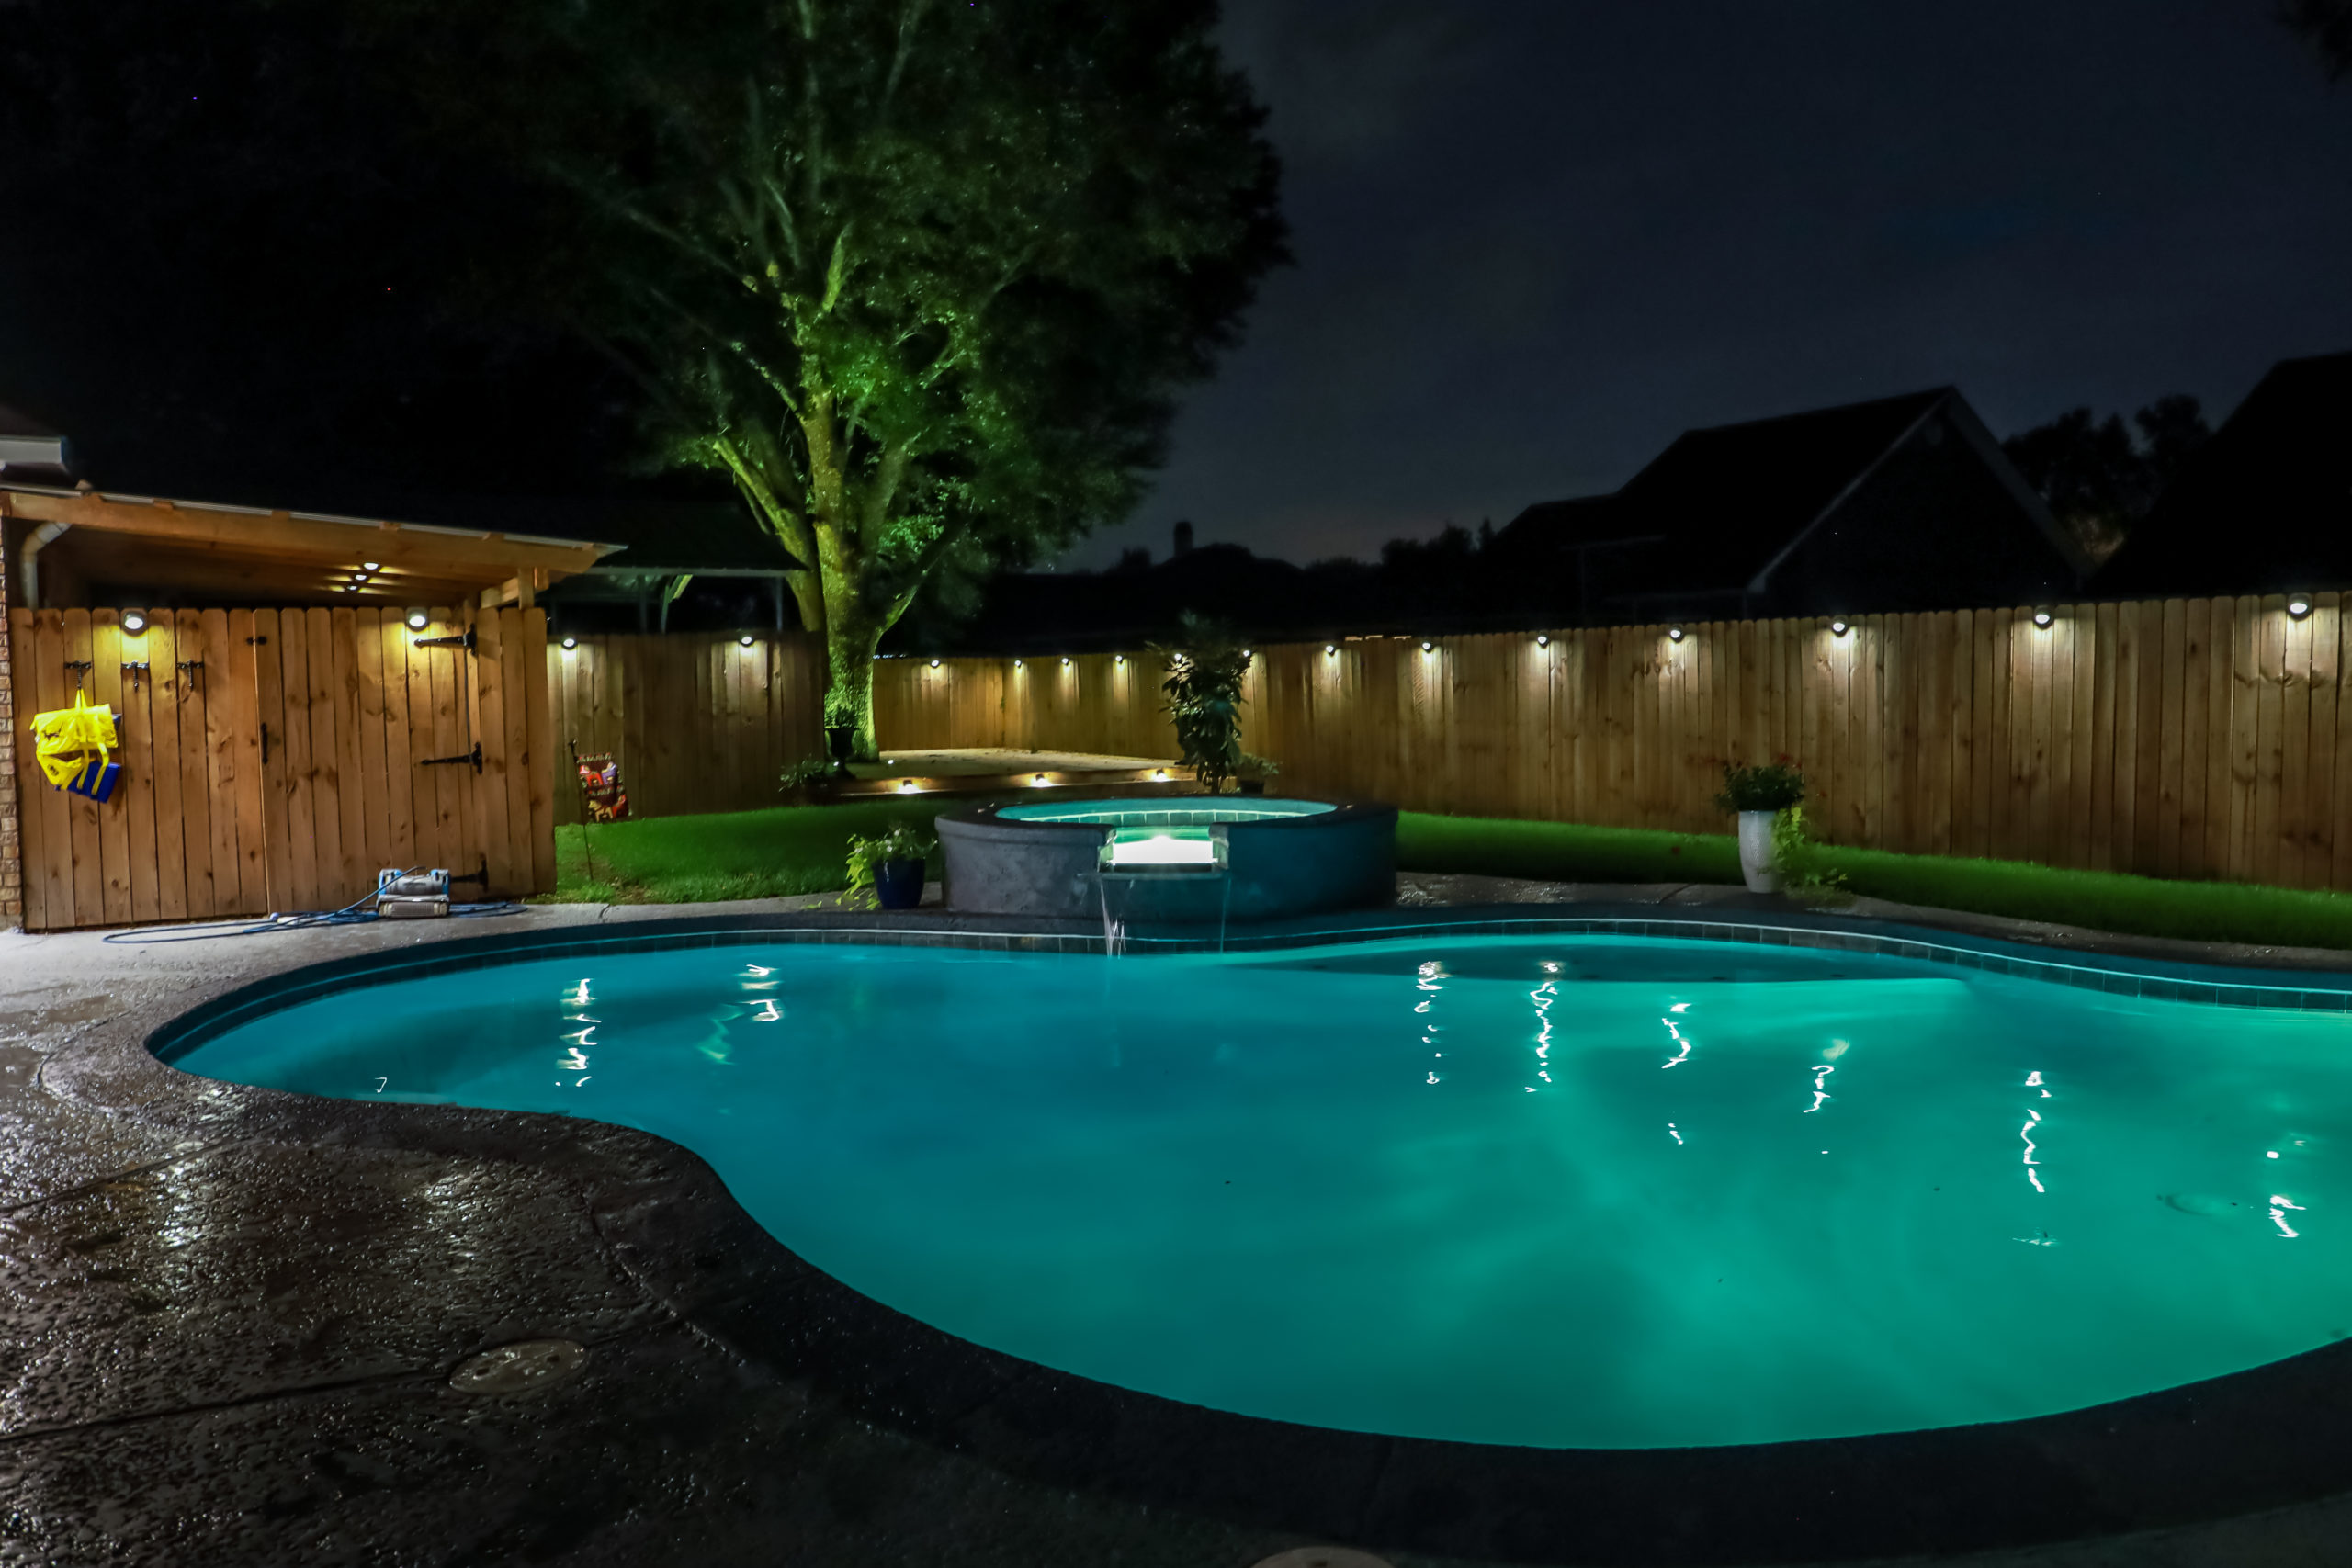 A backyard swimming pool and jacuzzi hot tob at night with solar lights around the fence for privacy and illumination.